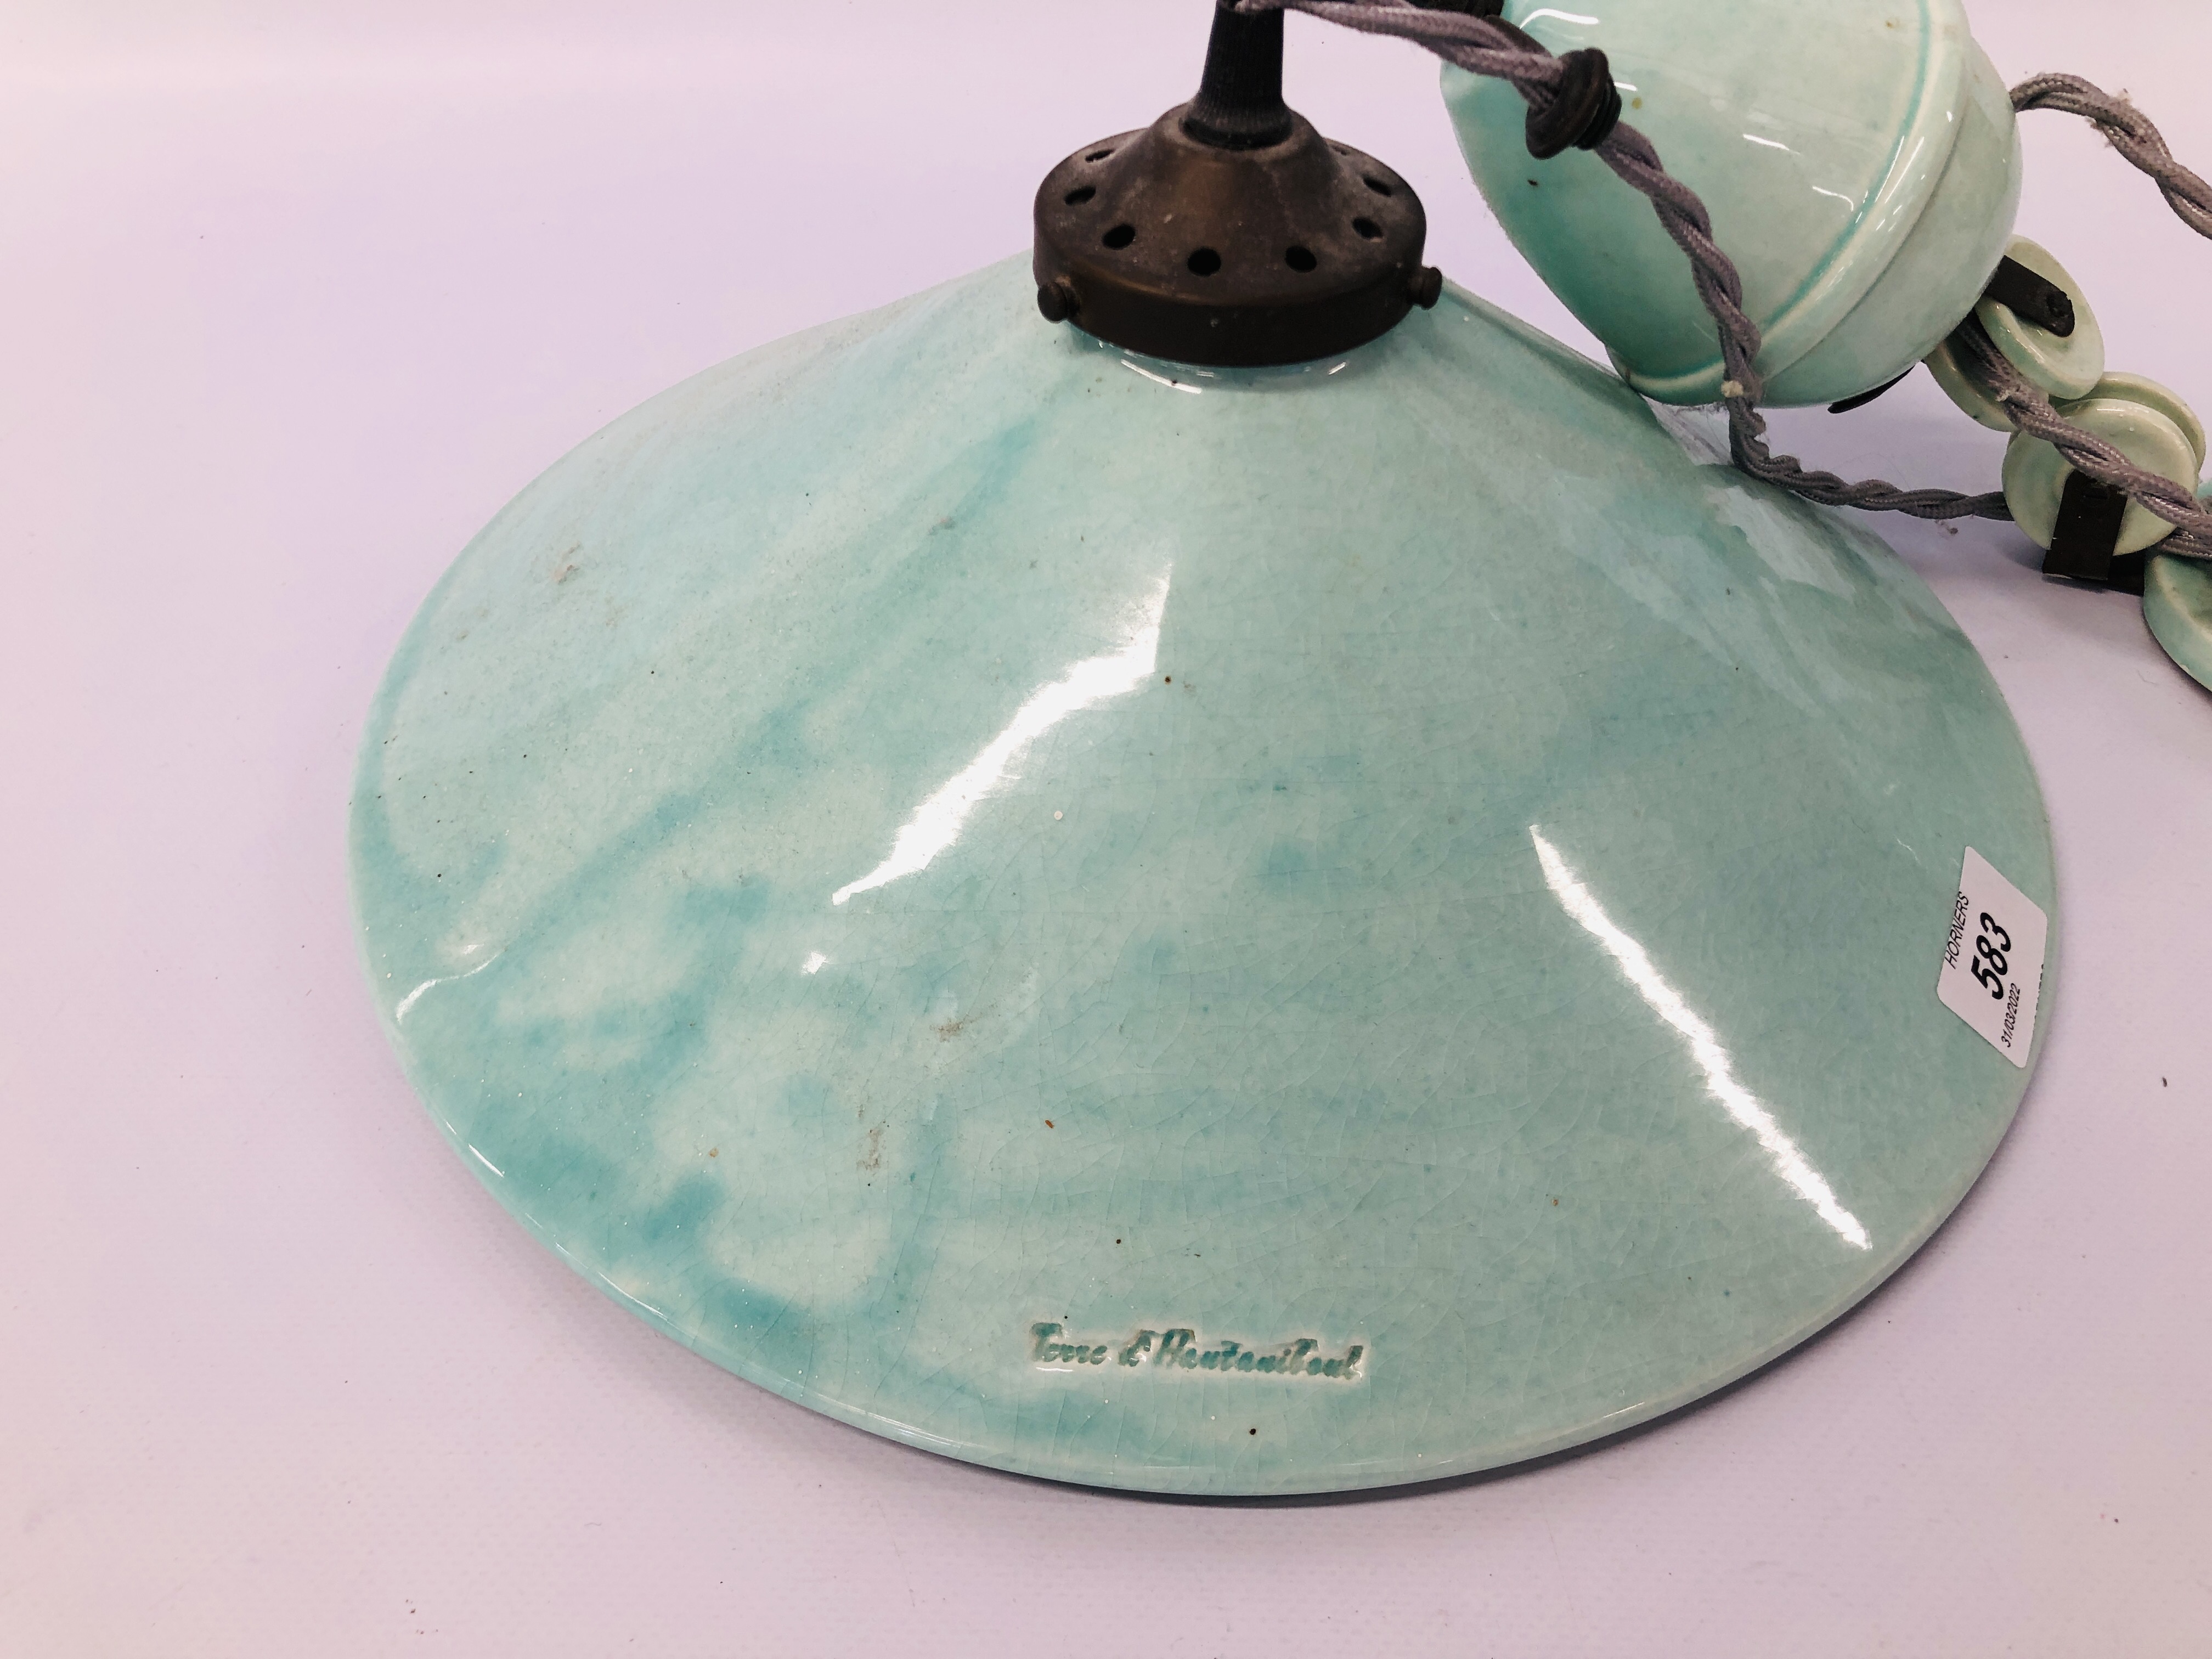 VINTAGE FRENCH TERRE D'HAUTANIBOUT CERAMIC GLAZED RISE AND FALL CEILING LIGHT. - Image 3 of 8